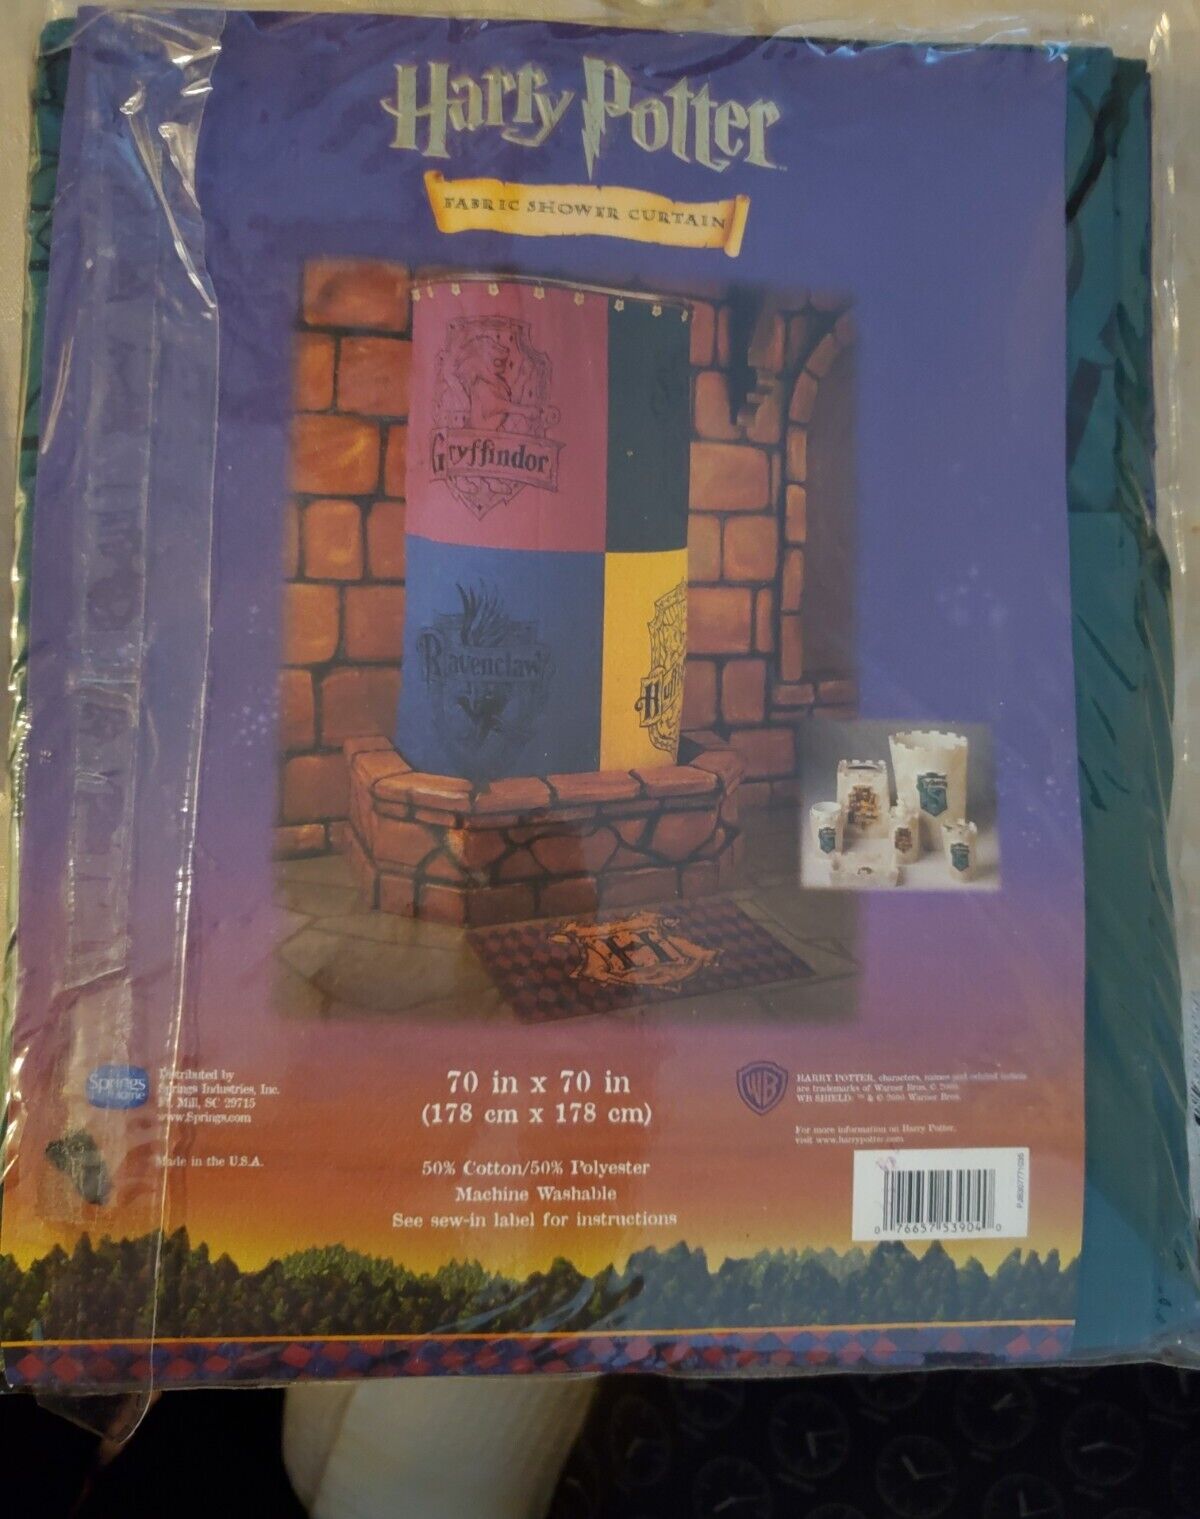 Harry Potter Fabric Shower Curtain. Fantasy Collectible Vintage. Brand new.